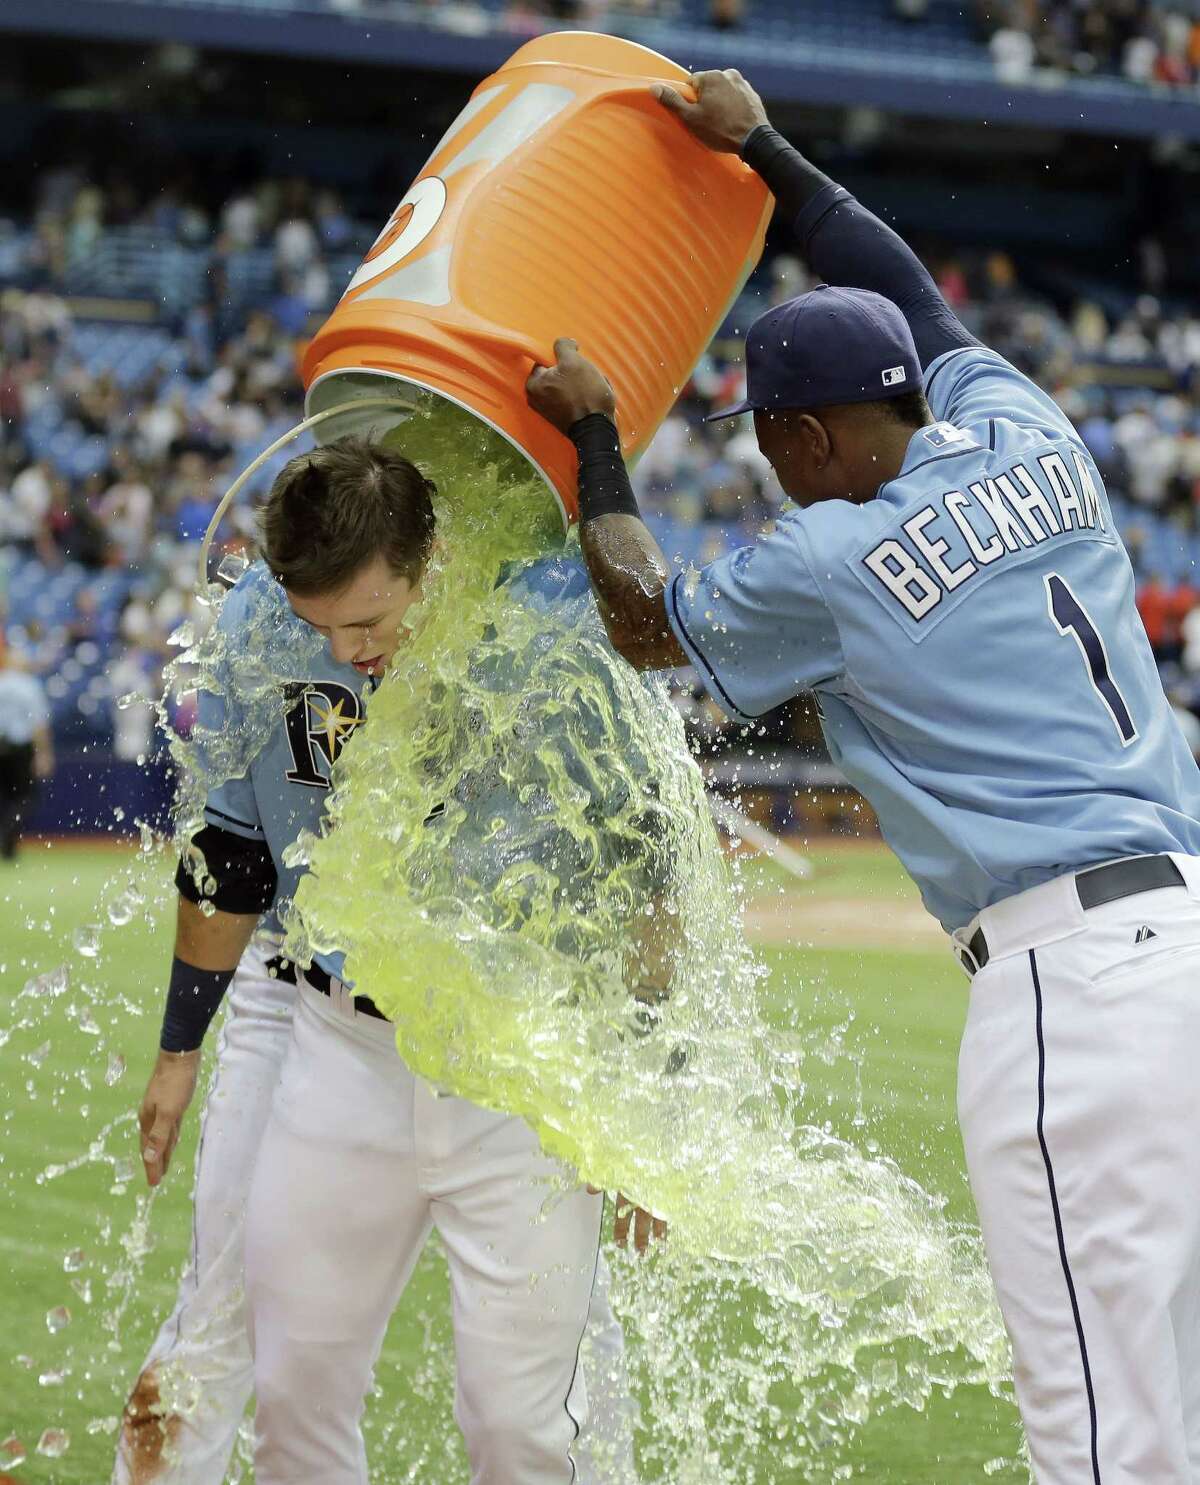 The Tampa Bay Rays’ Tim Beckham douses Richie Shaffer with Gatorade after the Rays defeated the New York Mets 4-3 on Sunday in St. Petersburg, Fla.